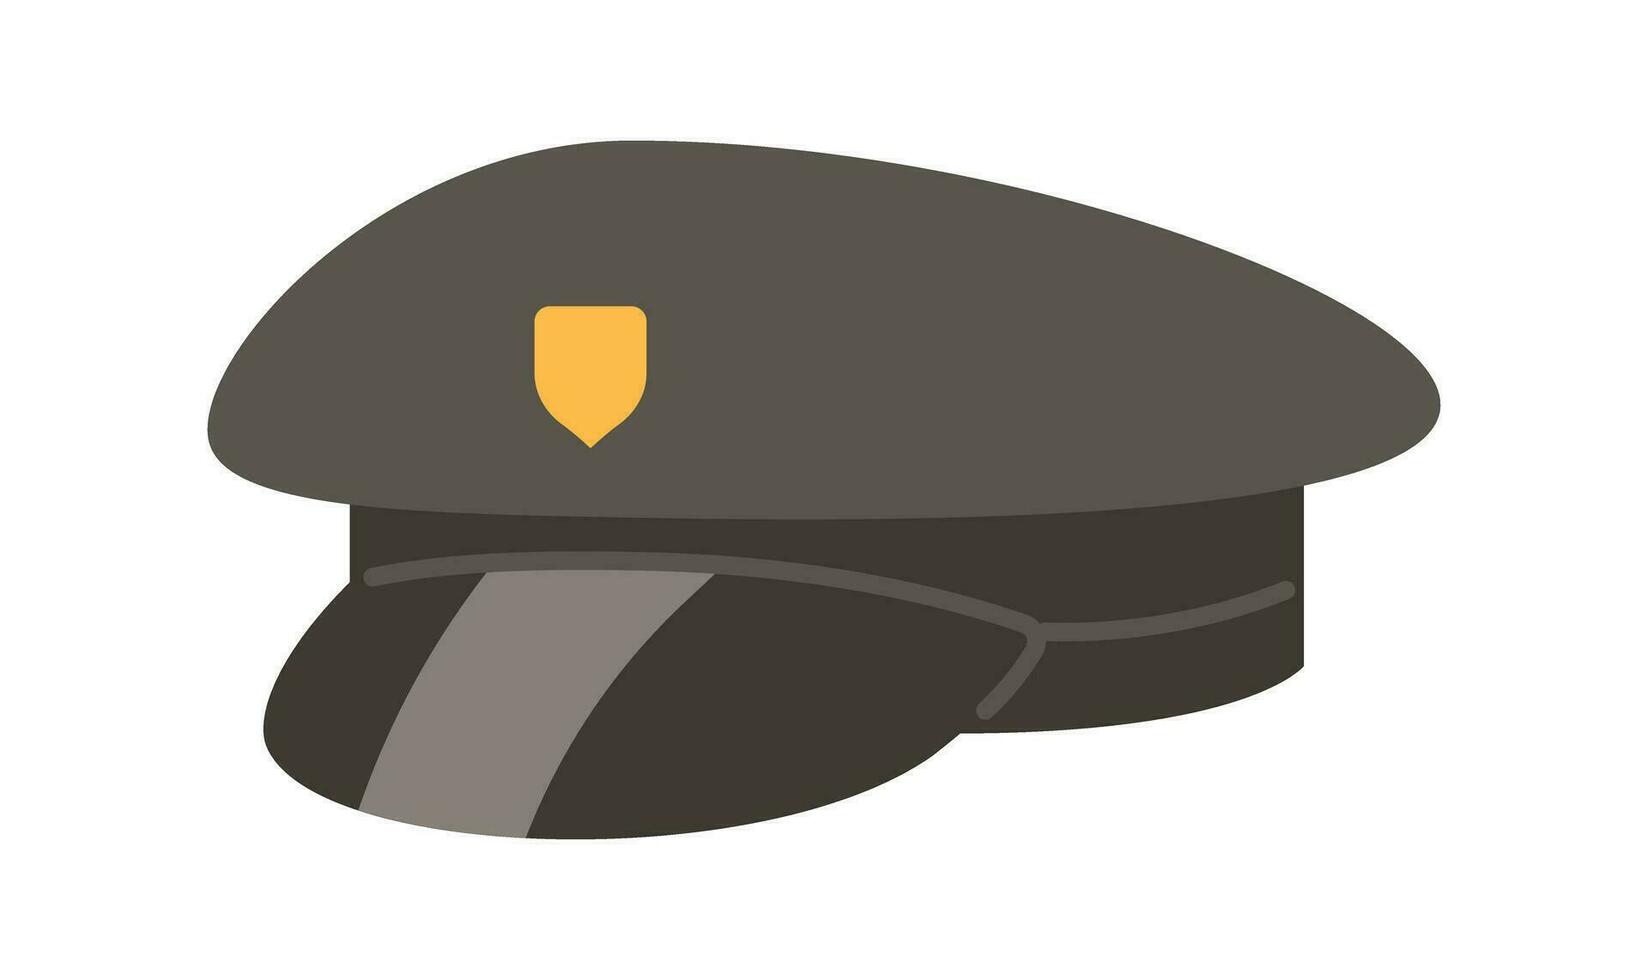 Policeman hat 2D cartoon object. Uniform police officer accessory isolated vector item white background. Security staff. Law enforcement uniform cap headwear color flat spot illustration